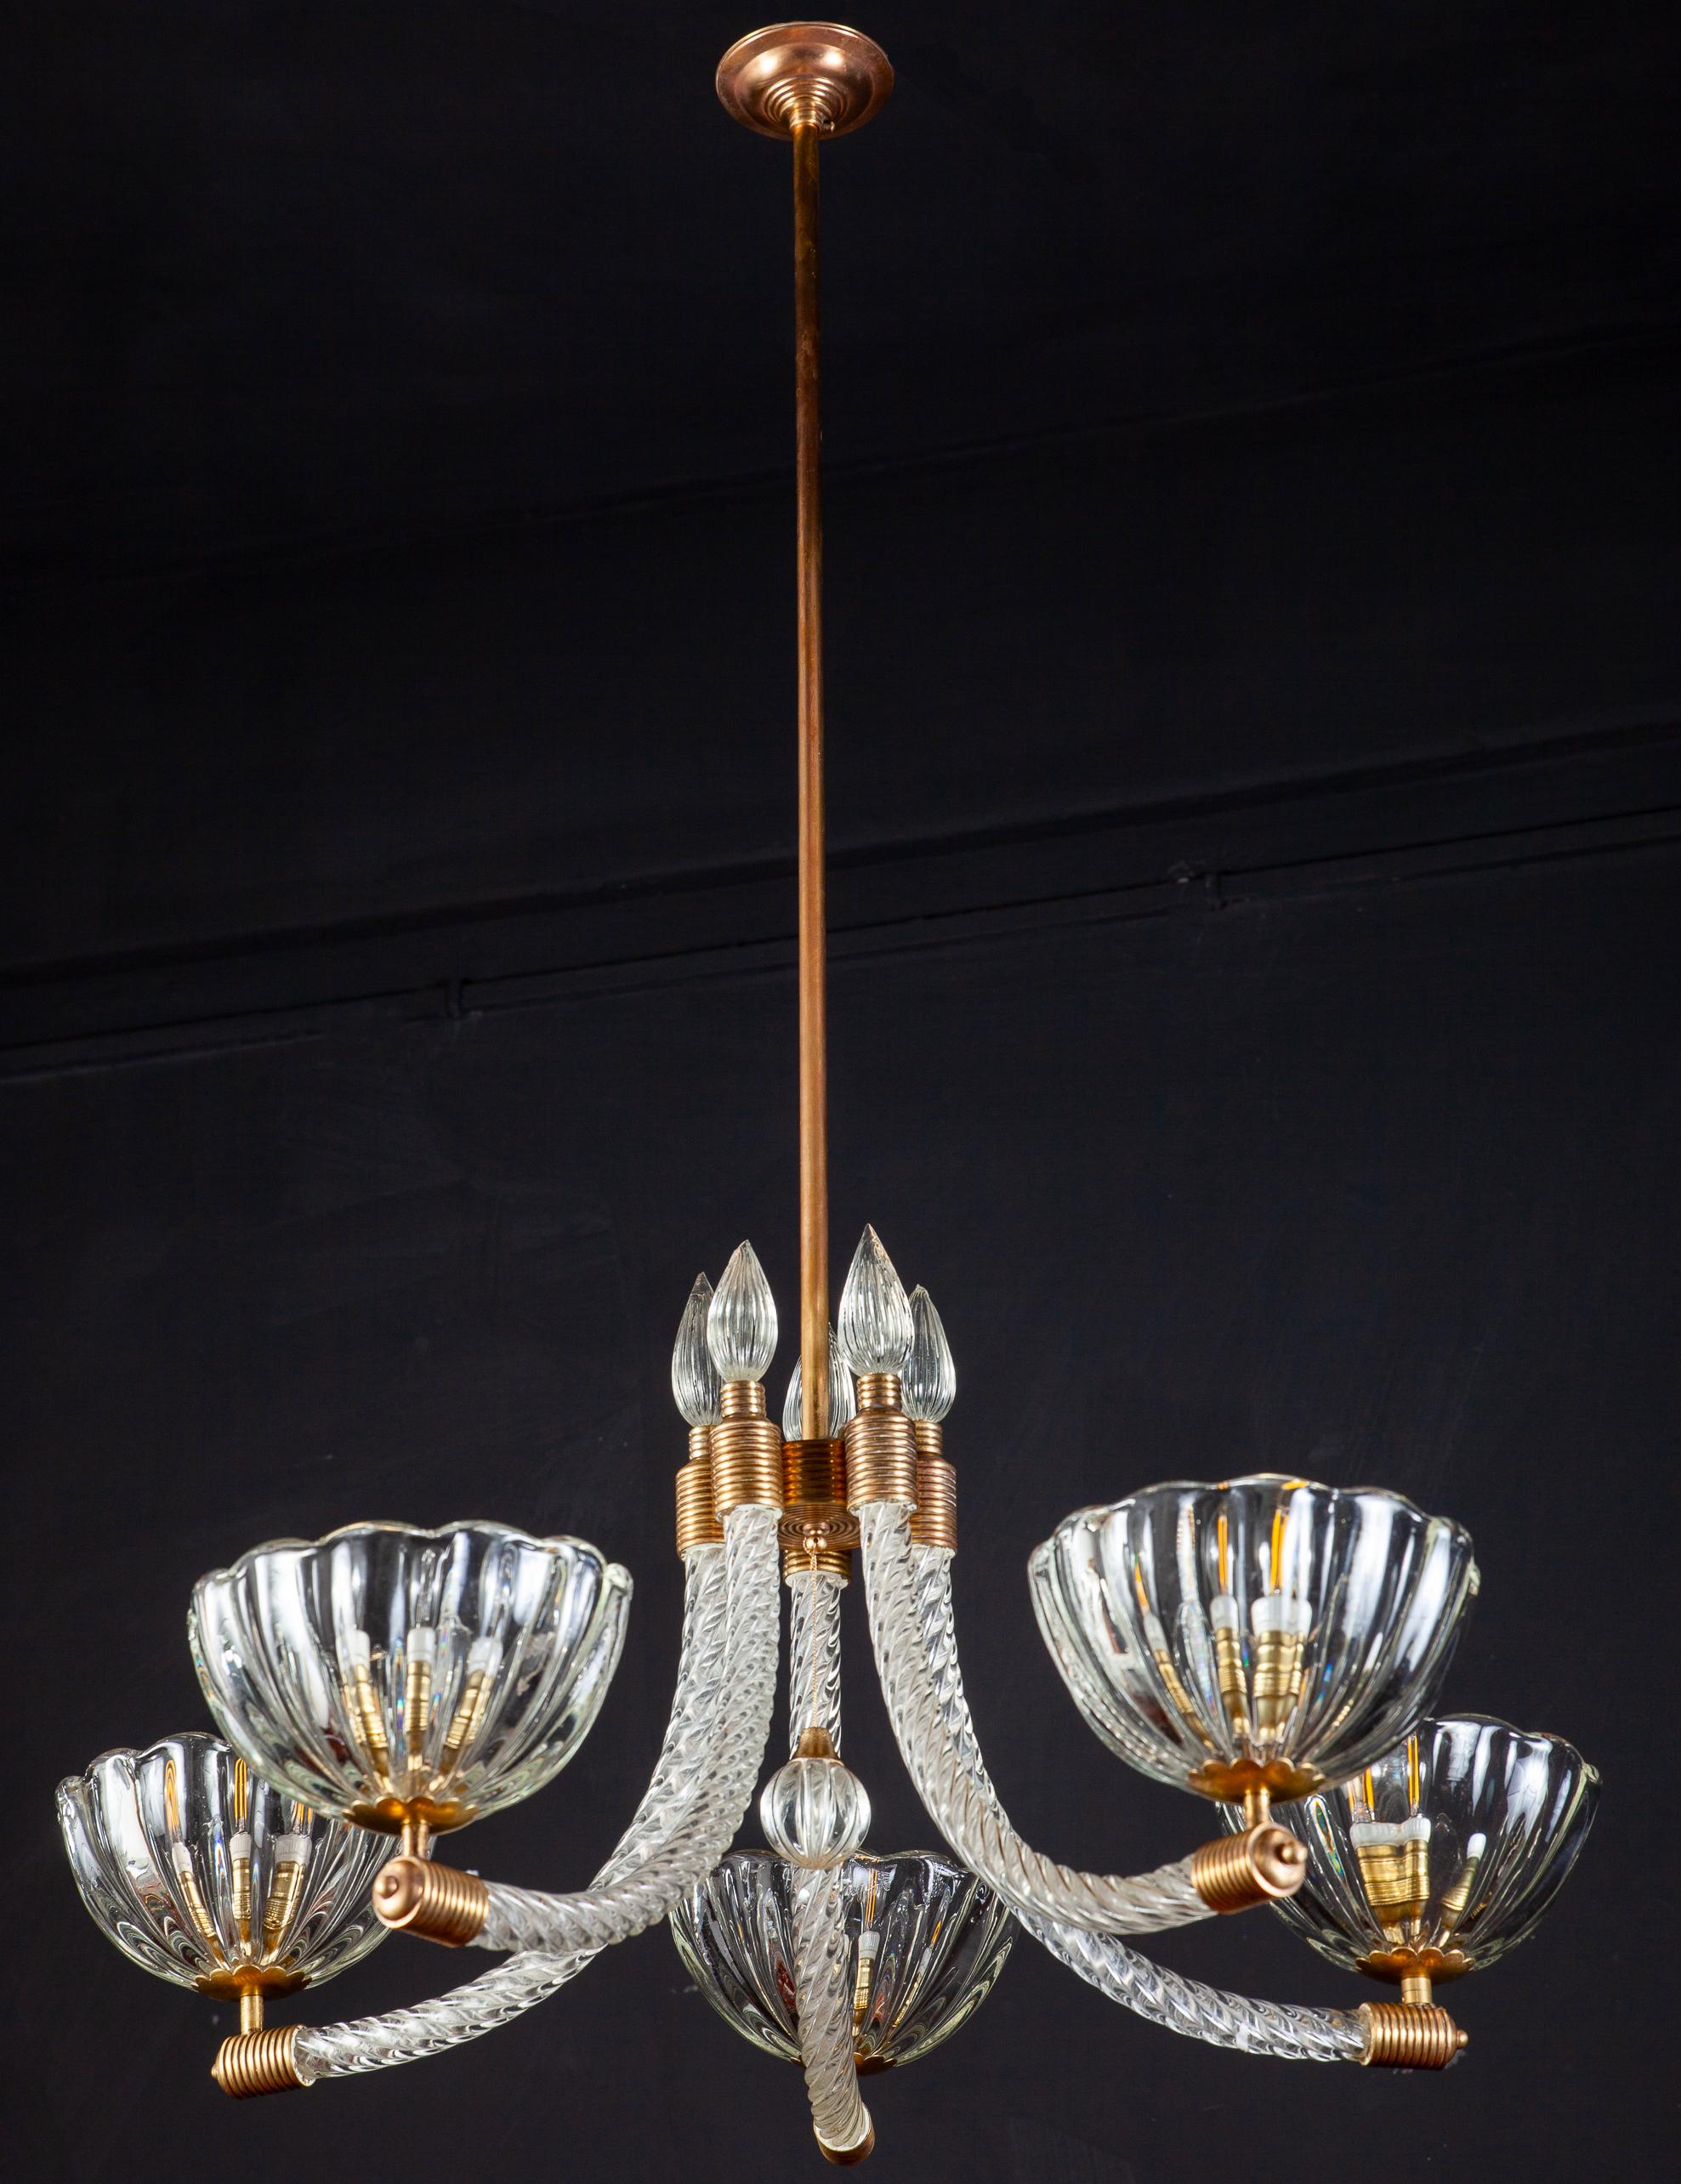 Mid-20th Century Italian Art Deco Chandelier by Barovier & Toso Murano, 1940 For Sale